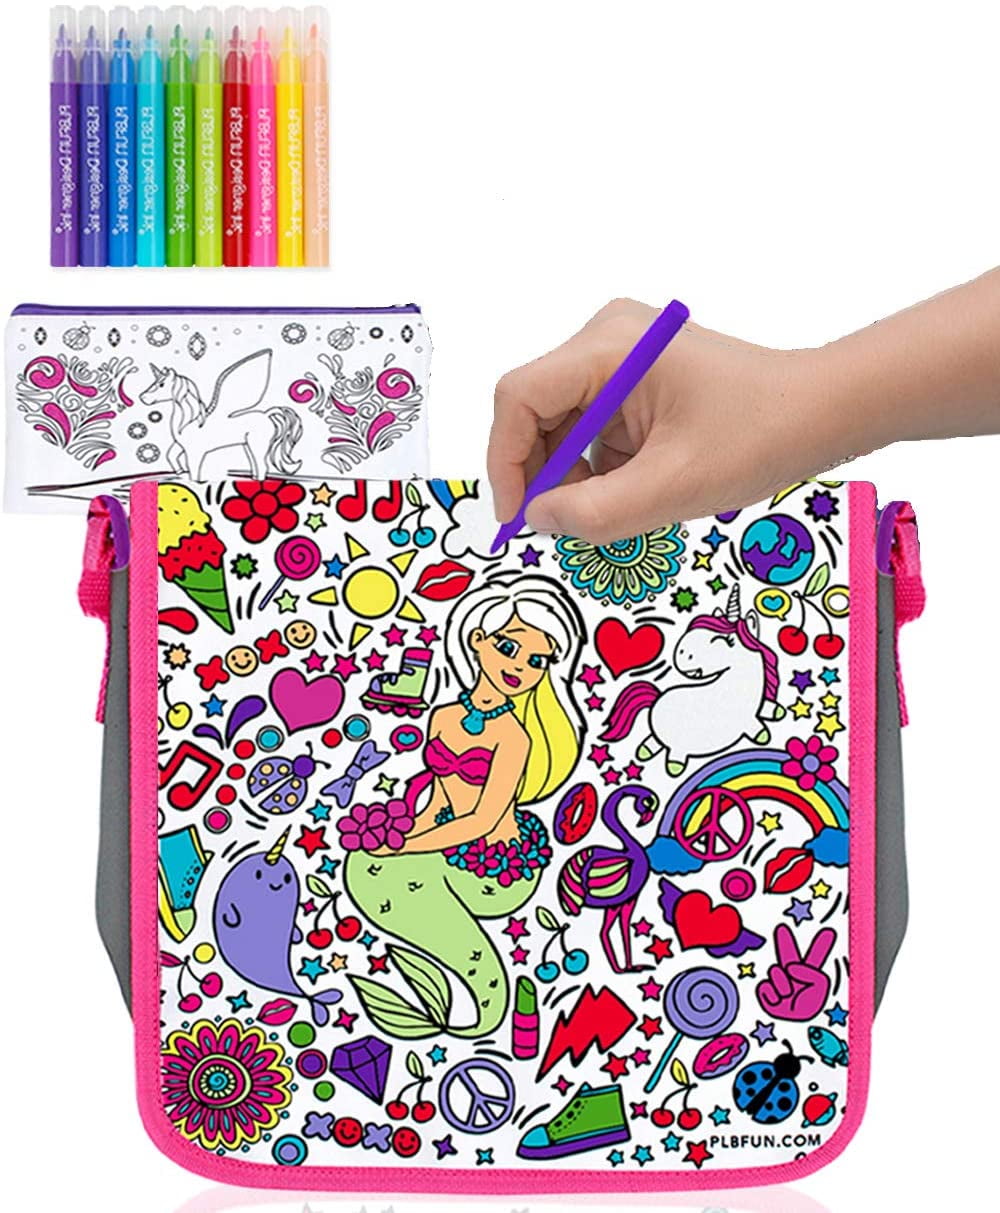 Amazing Value in this Creative Heavy Duty Back to School Bag for Kids Set! Purple Ladybug Large Pink Backpack for Girls with Color-in Water Bottle Plus Pencil Case Plus 10 Vibrant Coloring Markers